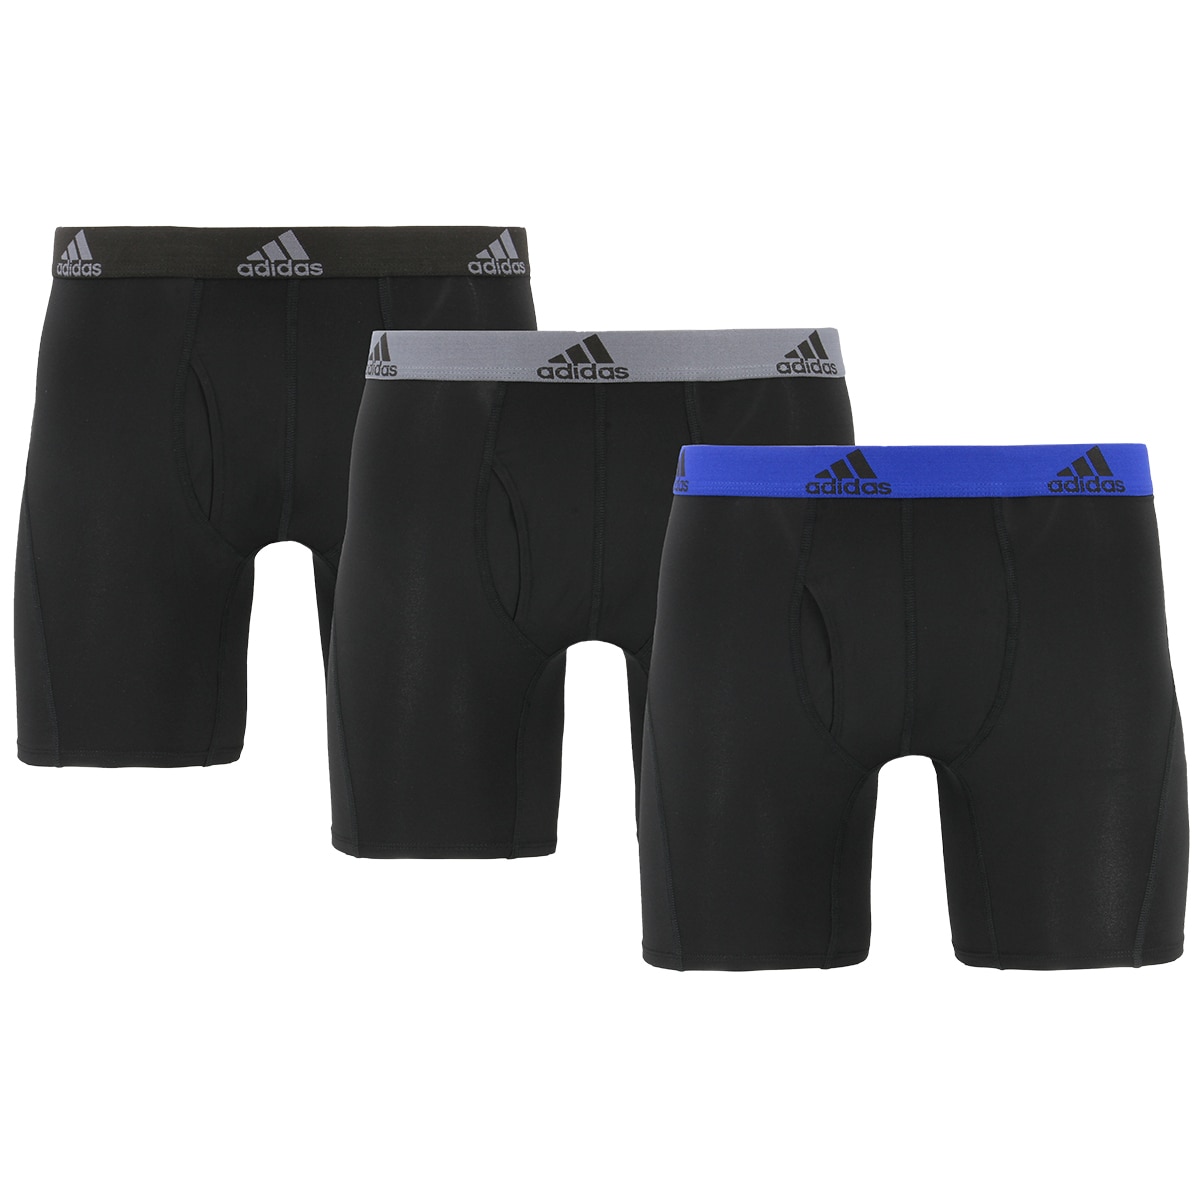 adidas relaxed fit boxer briefs